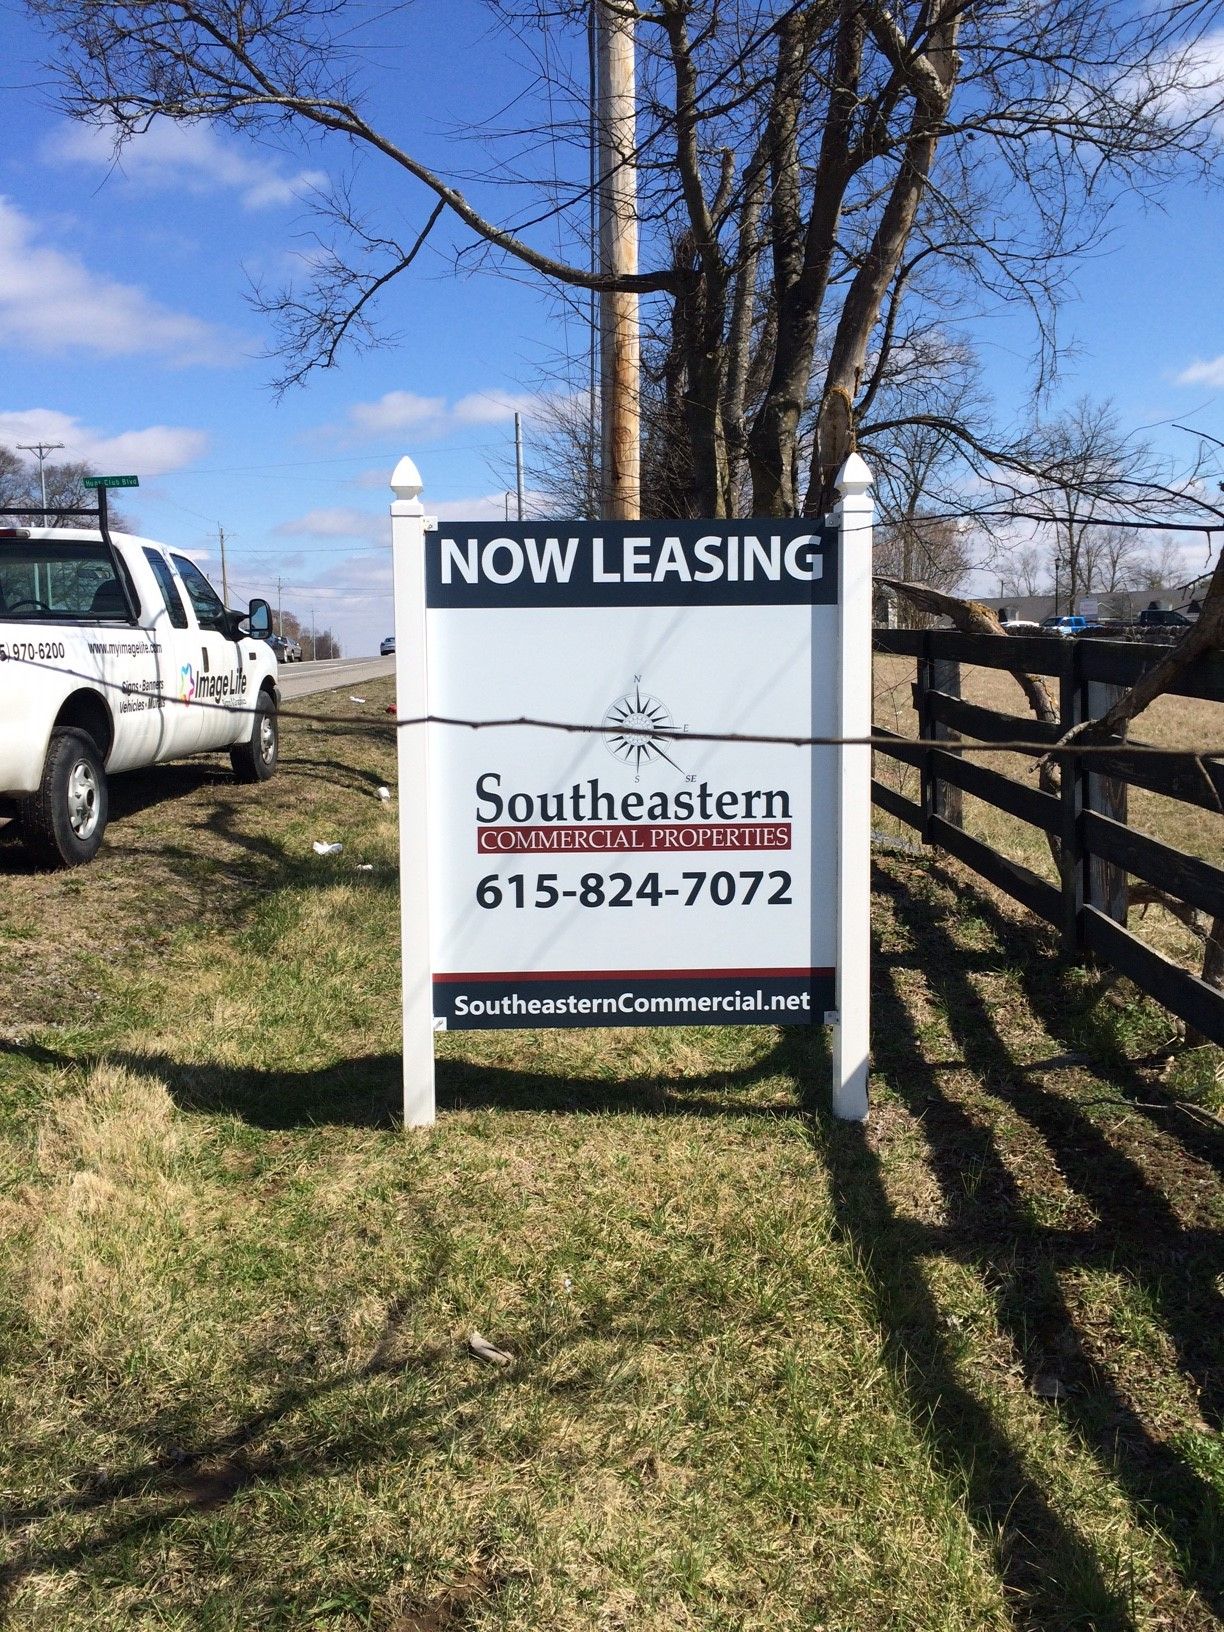 Leasing Signs